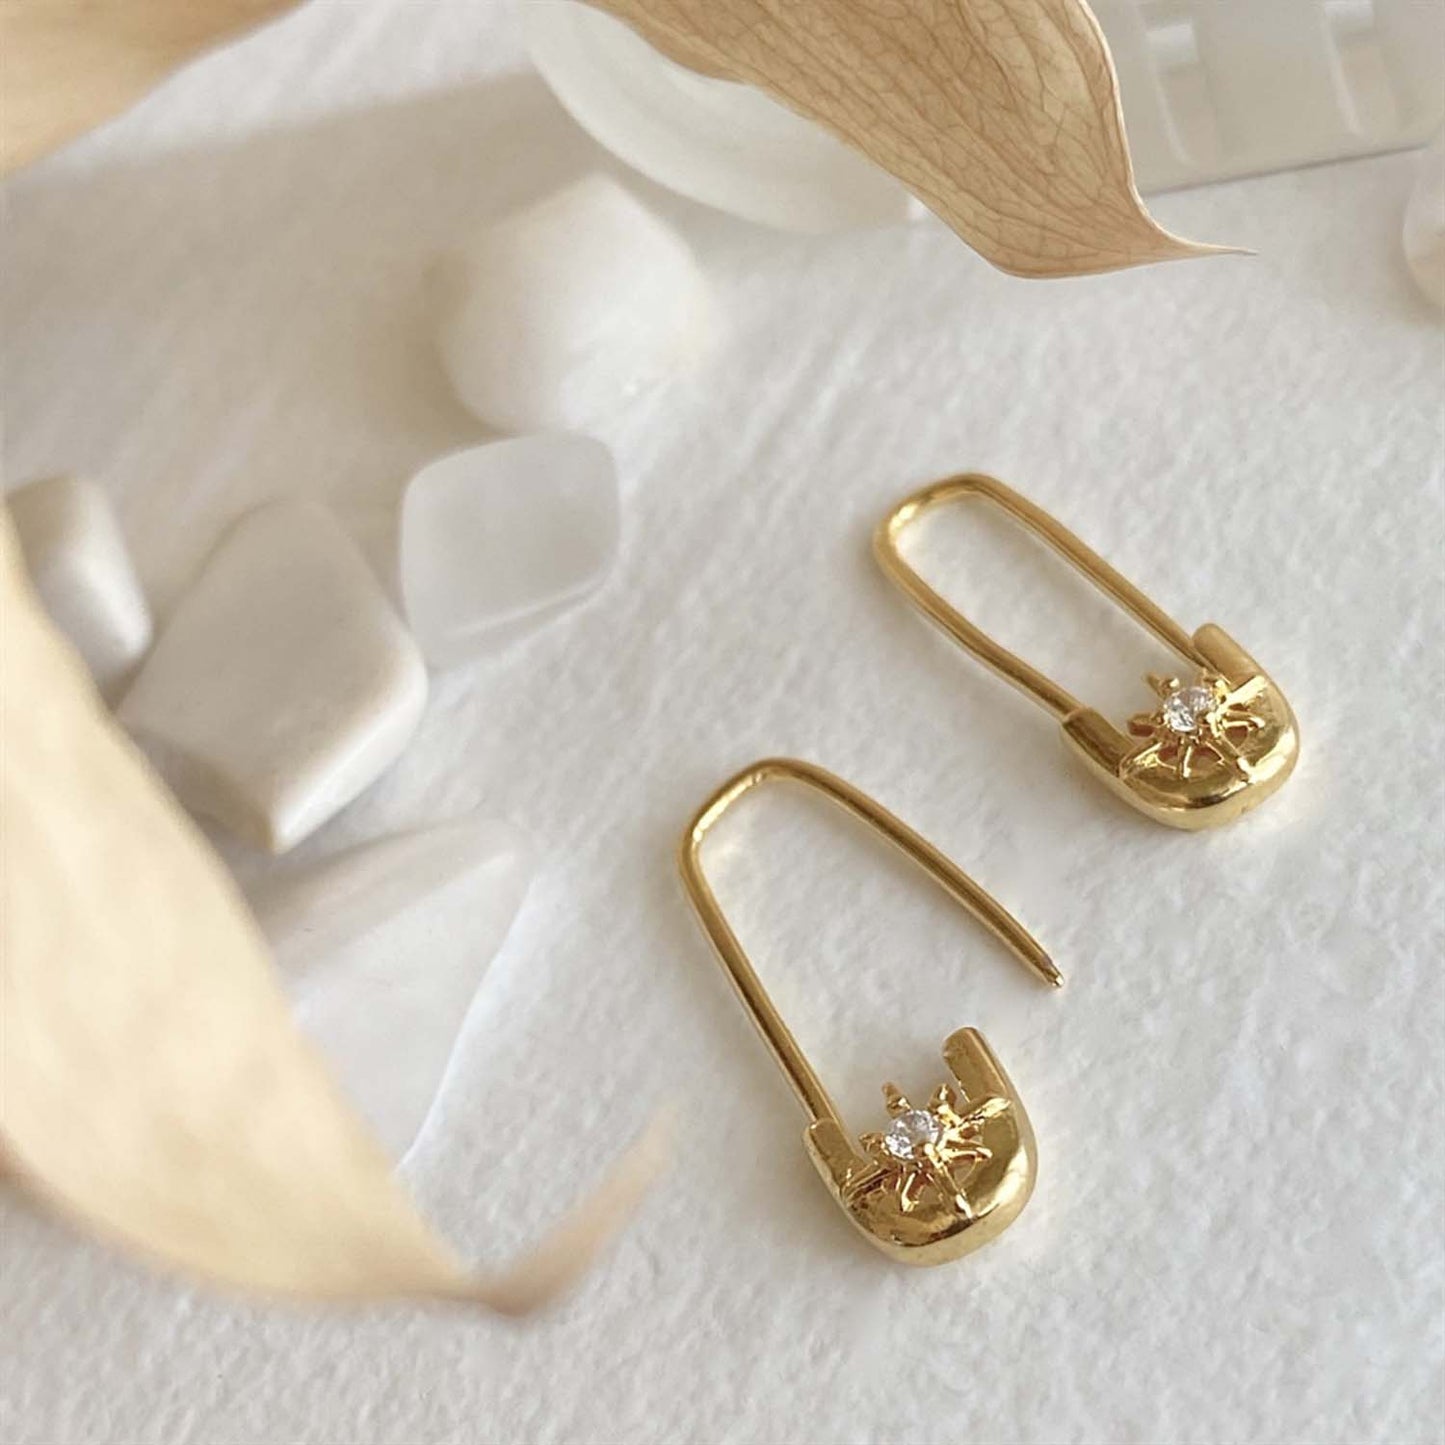 Walter Star Studded Safety Pin Style Earrings in Gold